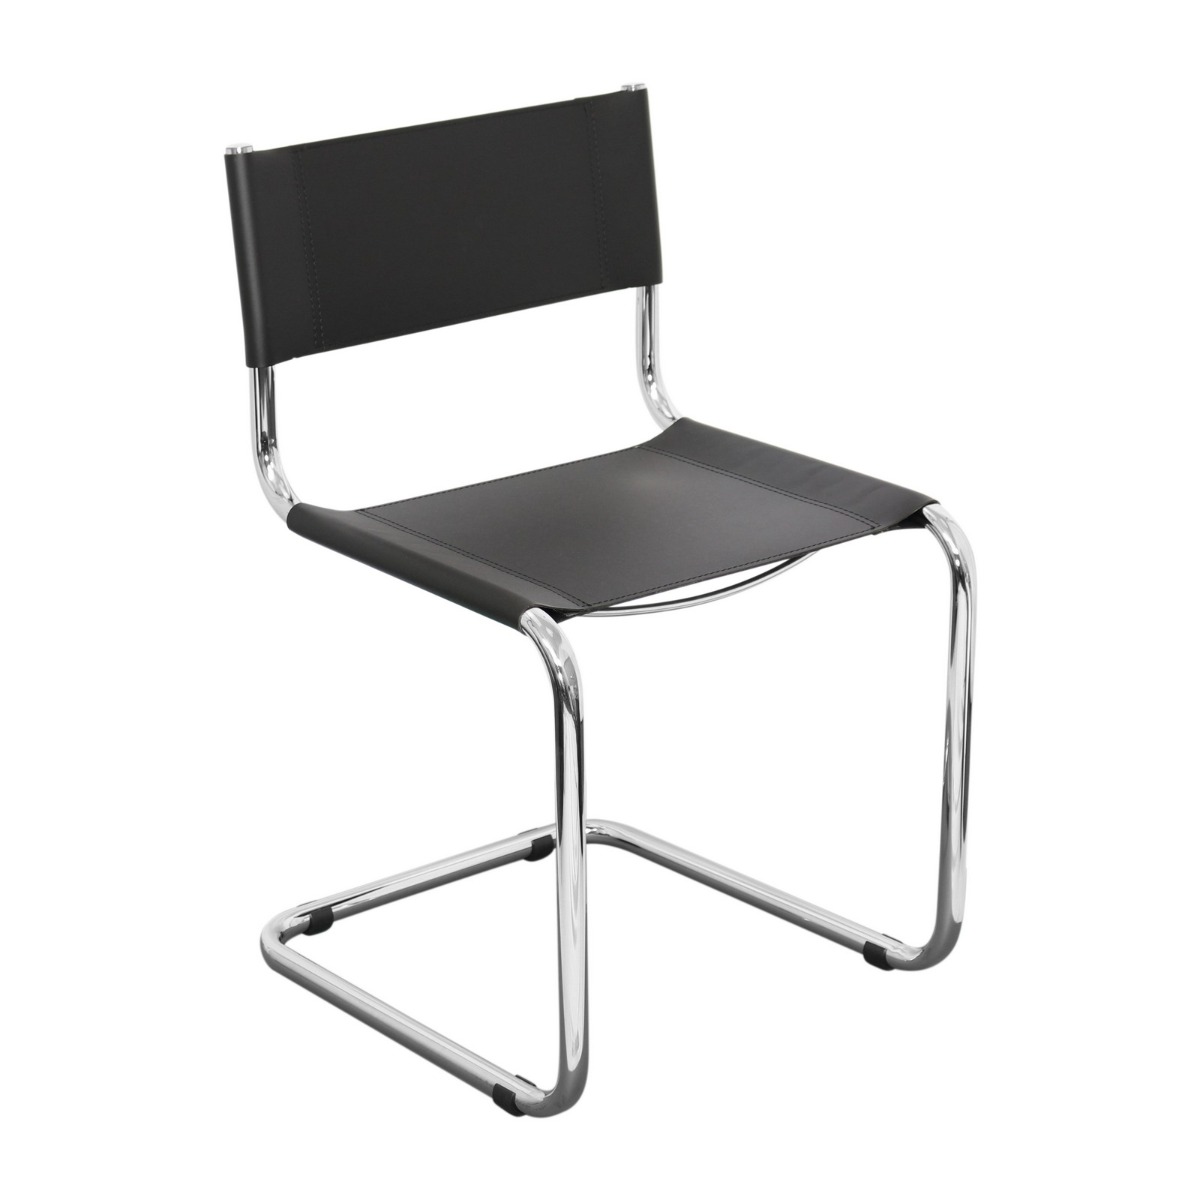 Breuer Chair Company Mart Stam Italia Cantilever Side Chair in Chrome and Black Faux Leather